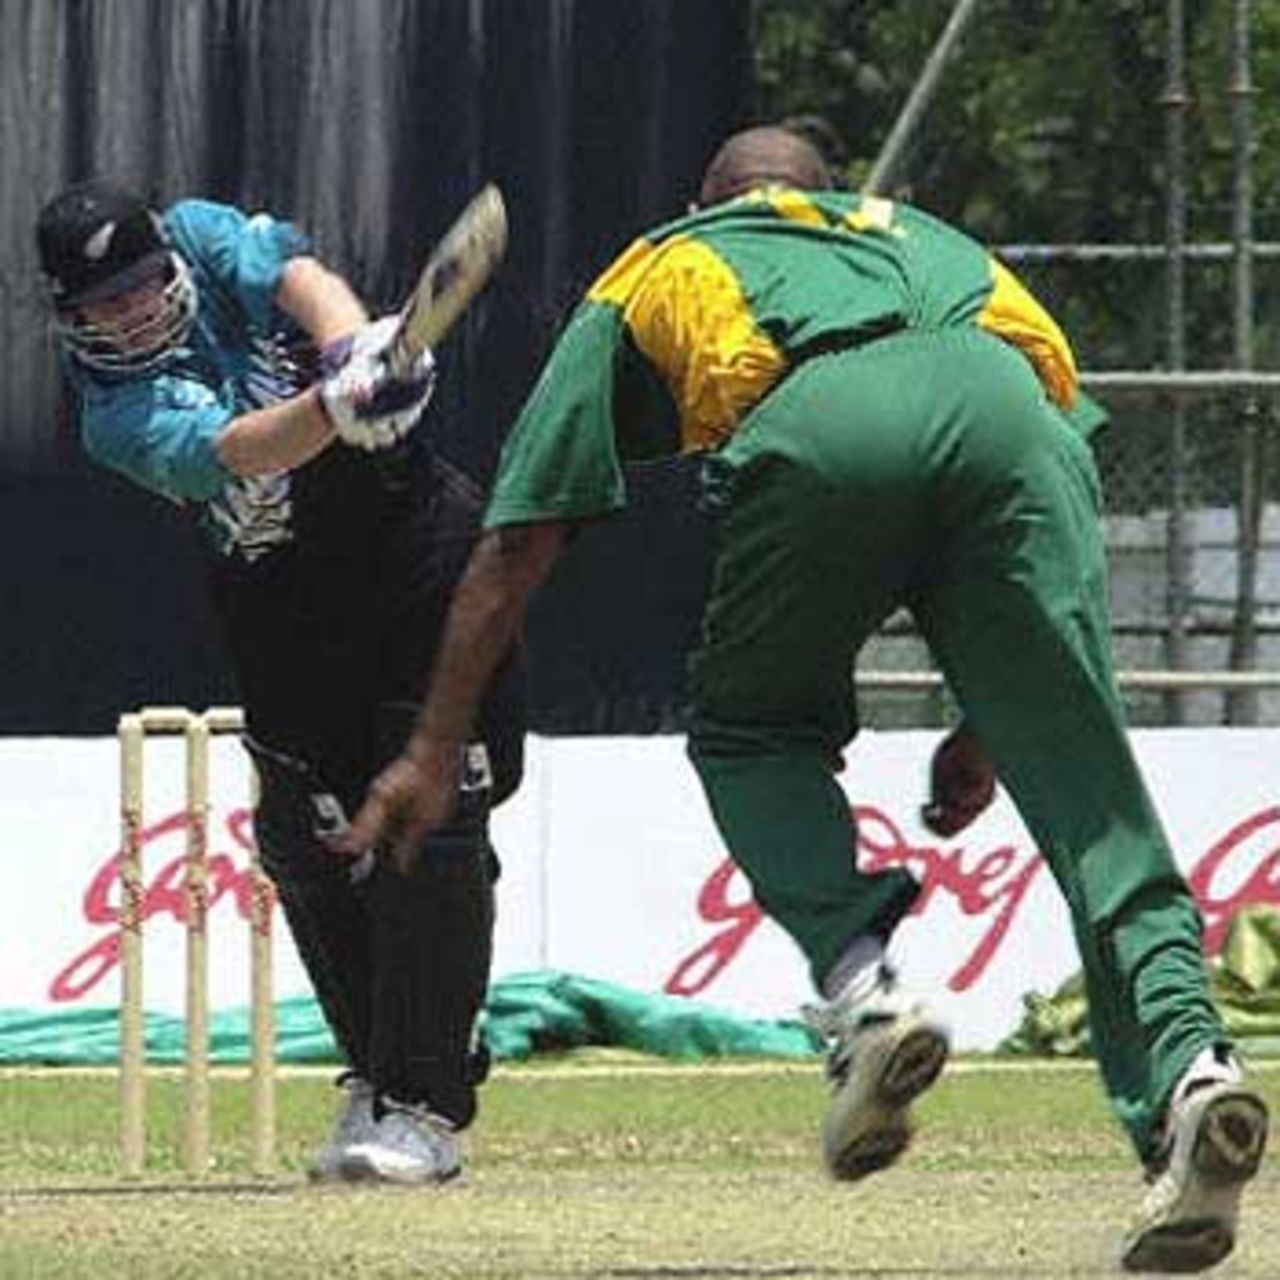 New Zealander Scott Styris drives on the onside during the Singapore Challenge 2000 cricket triangular in Singapore. South Africa made its way into a prime position as it dismissed New Zealand for 158. Godrej Singapore Challenge, 2000/01, 3rd Match, New Zealand v South Africa, Kallang Ground, Singapore 25 August 2000.